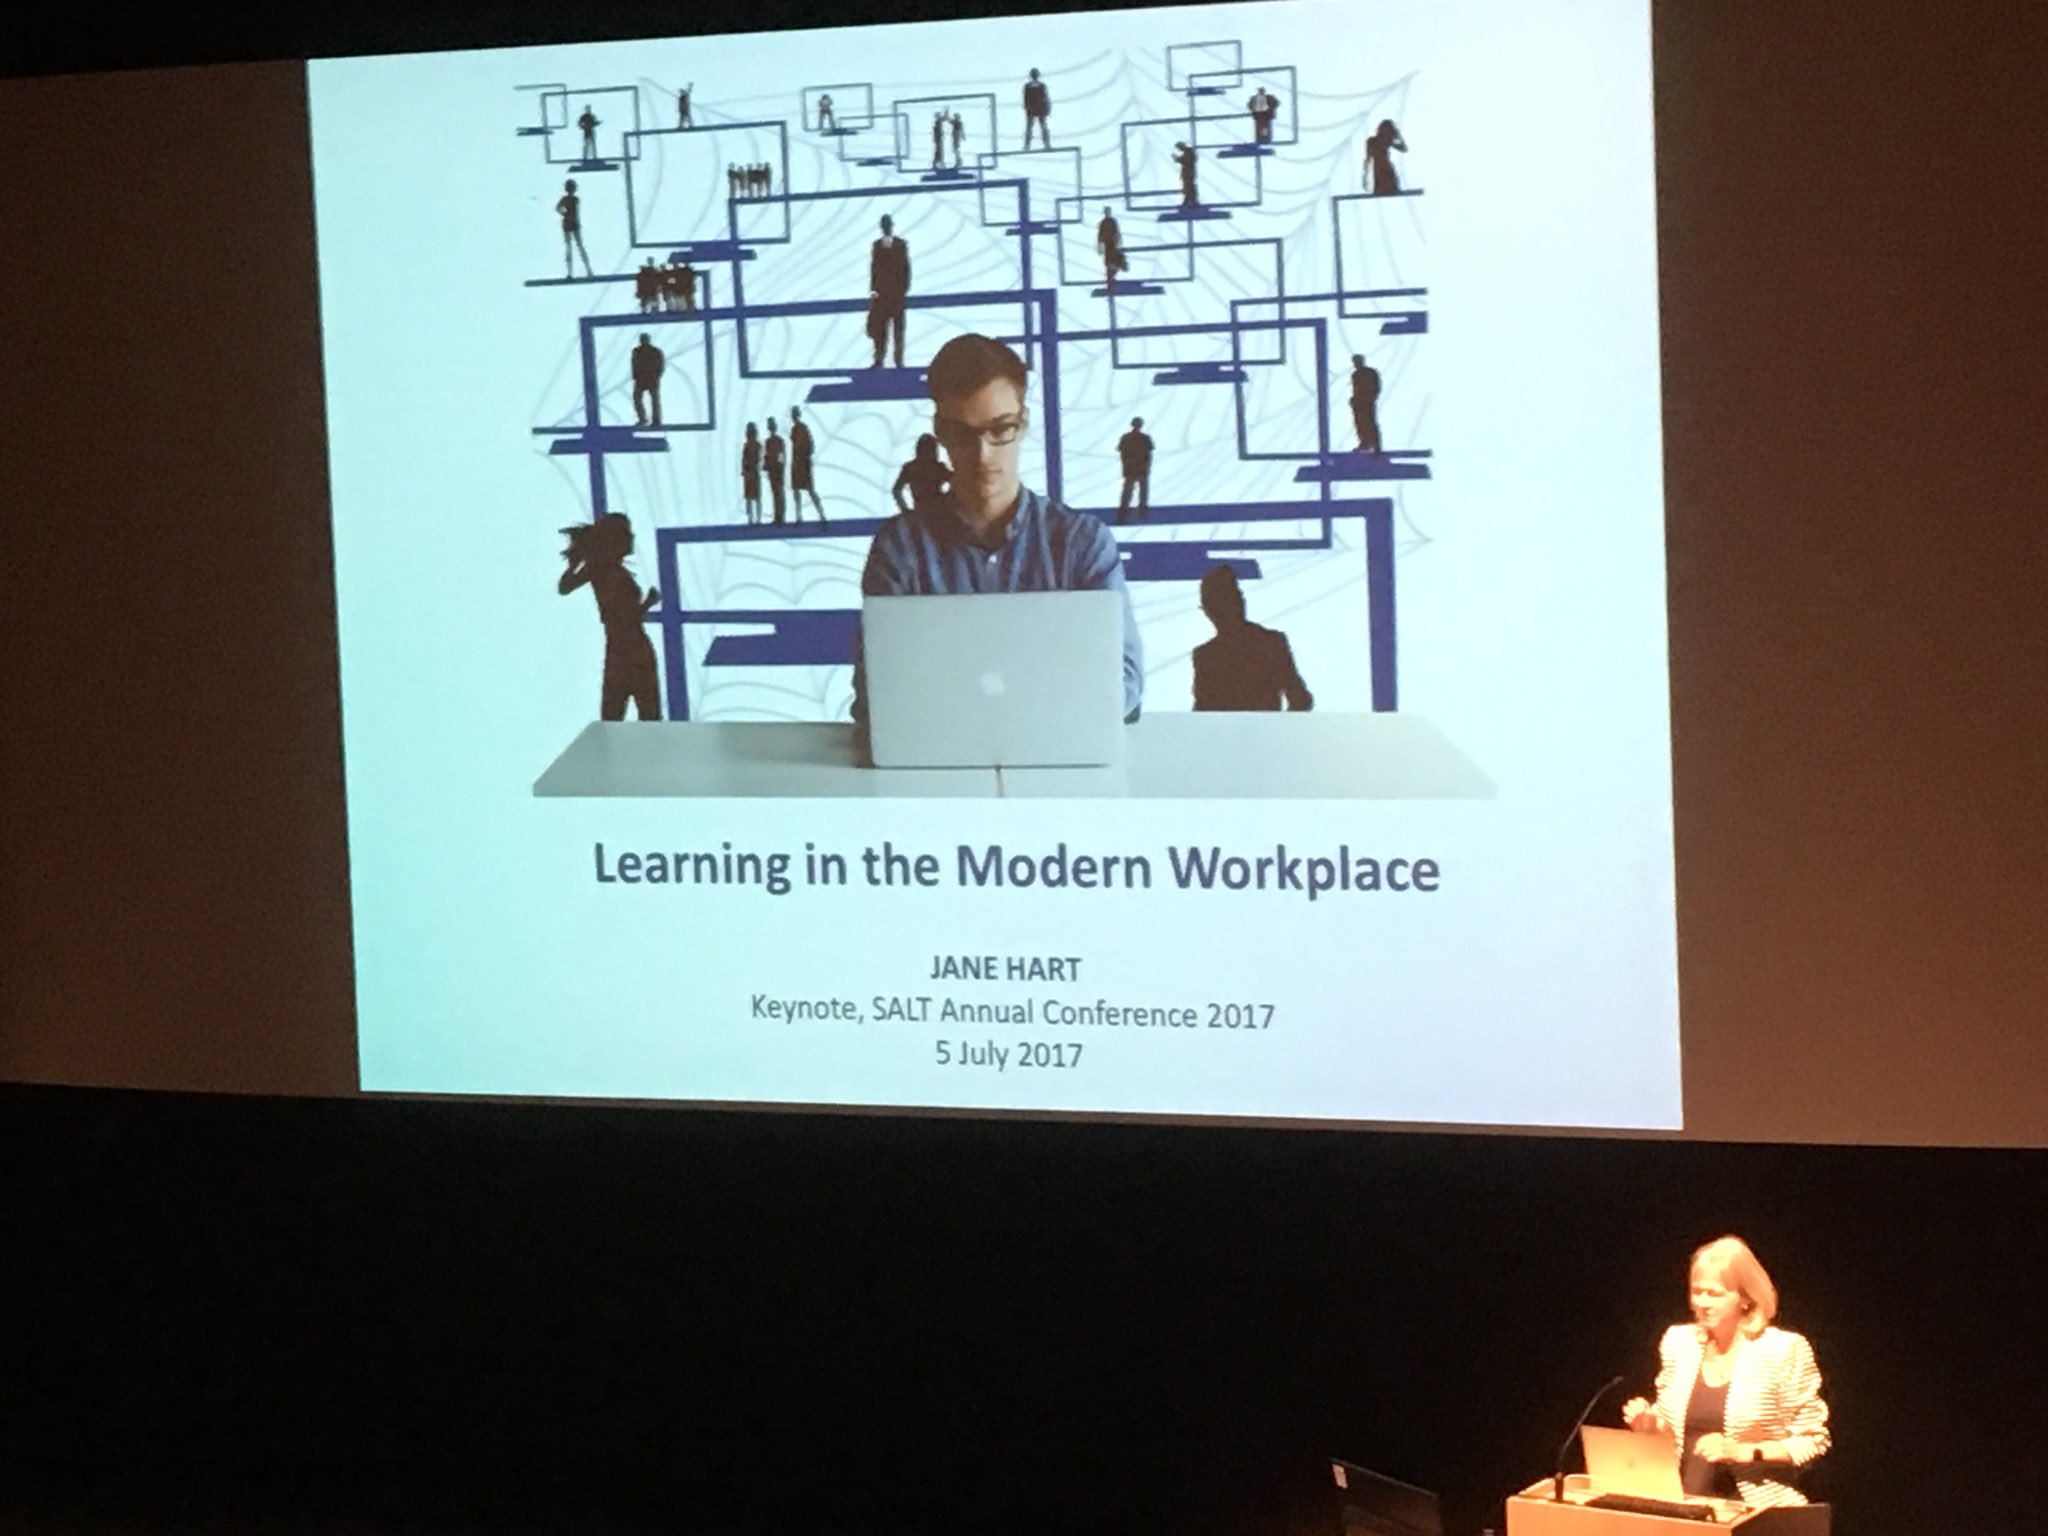 Jane Hart @C4LPT kicks off the #SUSALT17 @SwanseaUni on #workplace #learning. Looking forward to this! https://t.co/JVJcsHL6ZF